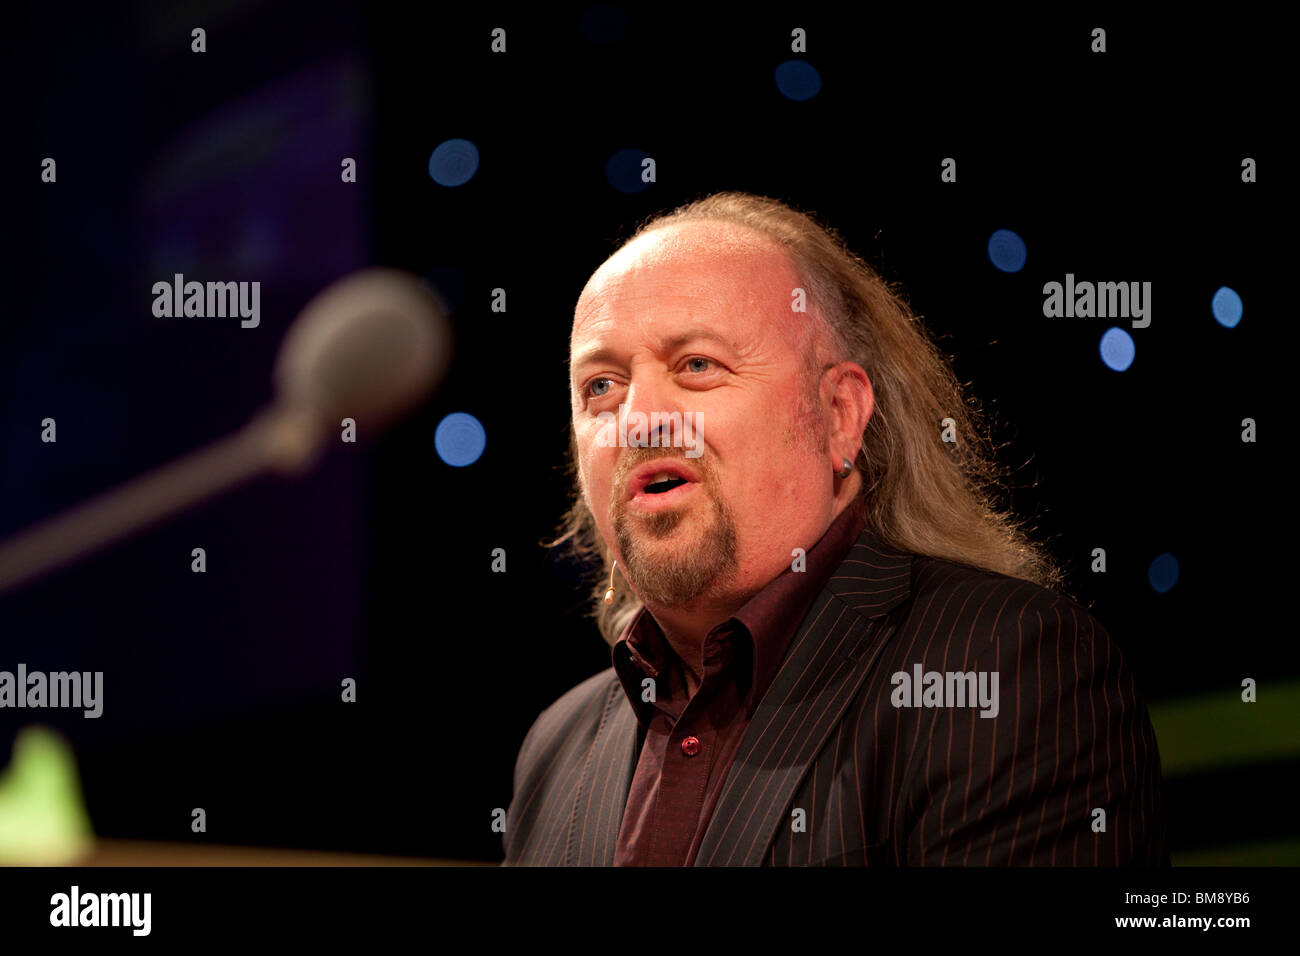 comedian bill bailey presenting at awards ceremony Stock Photo